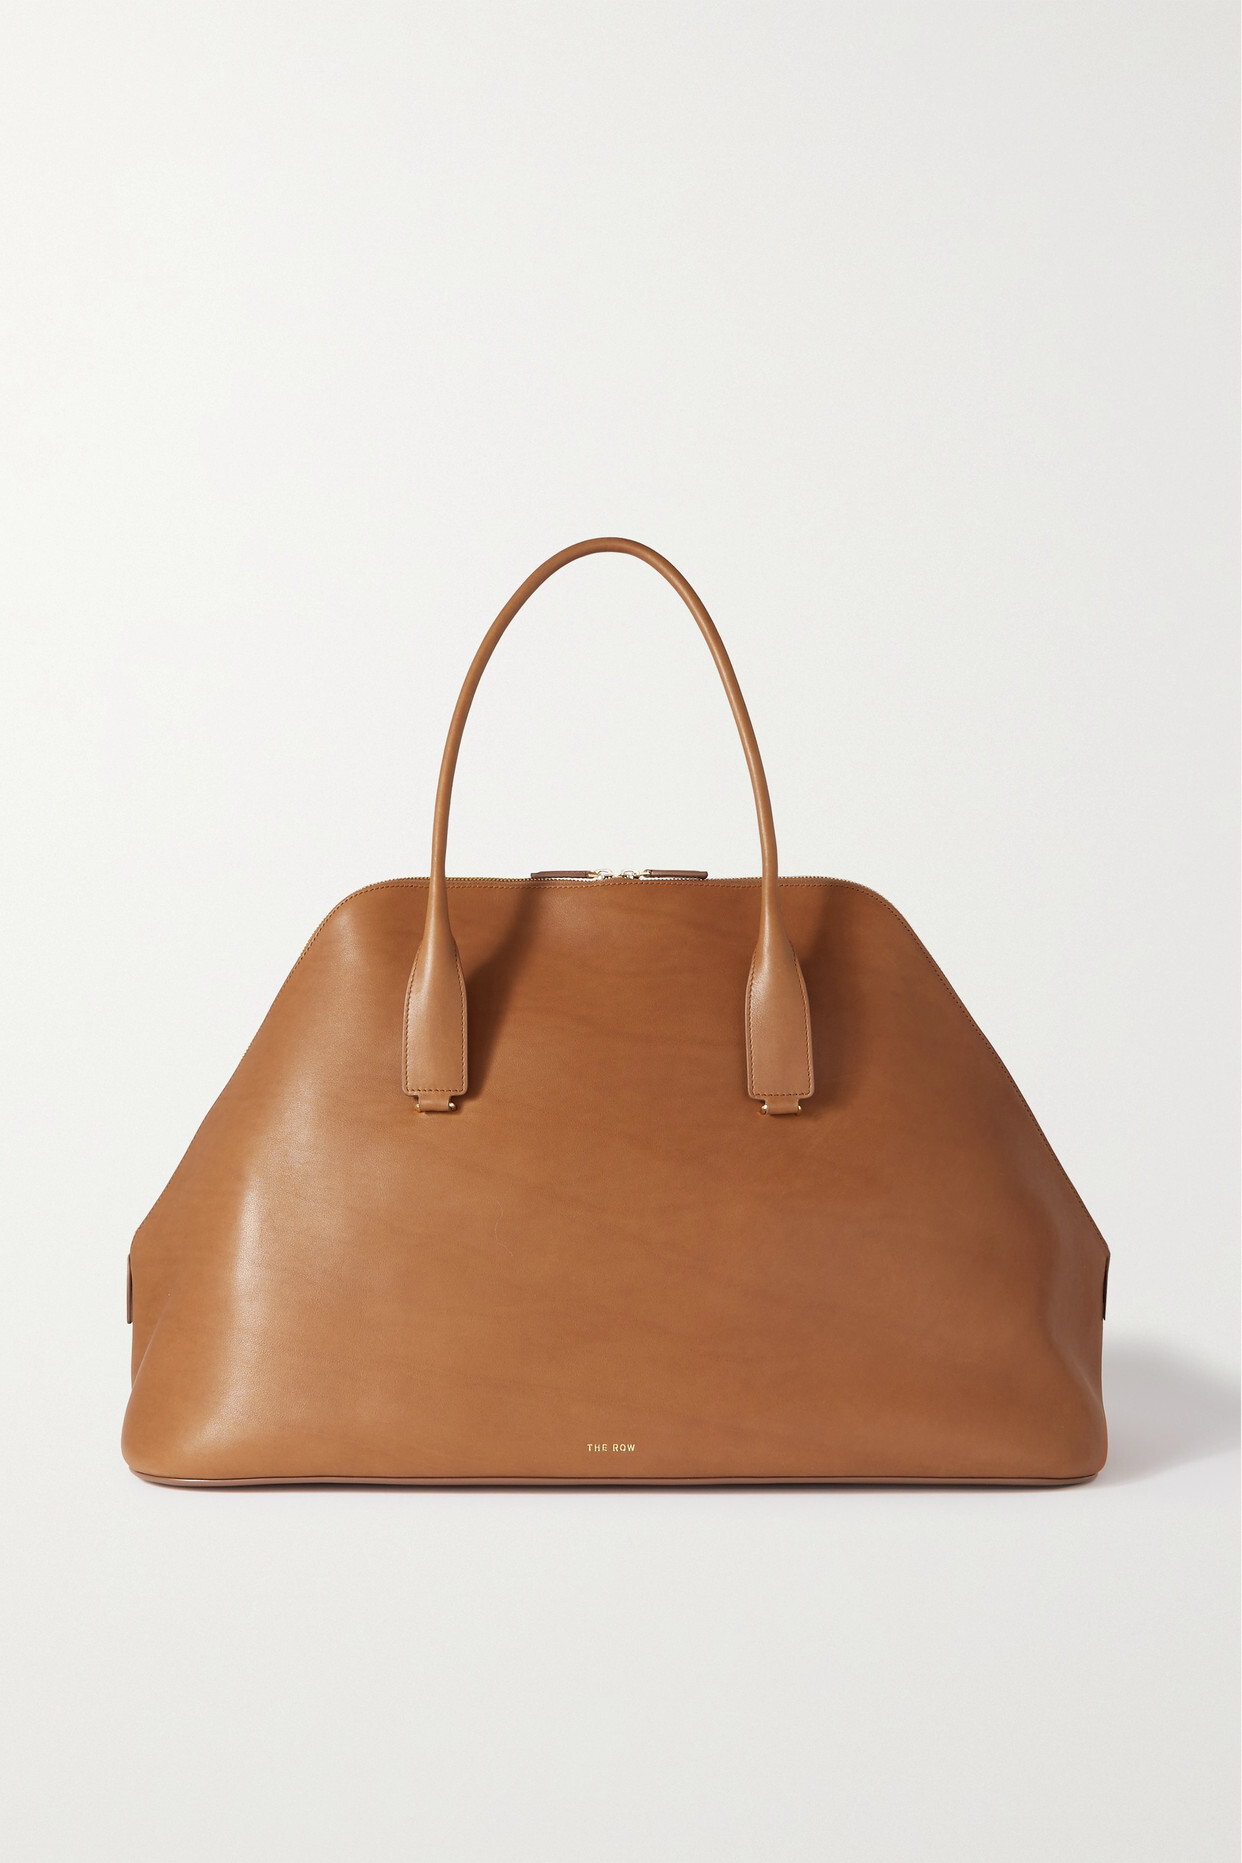 The Row - Devon Leather Tote - Brown